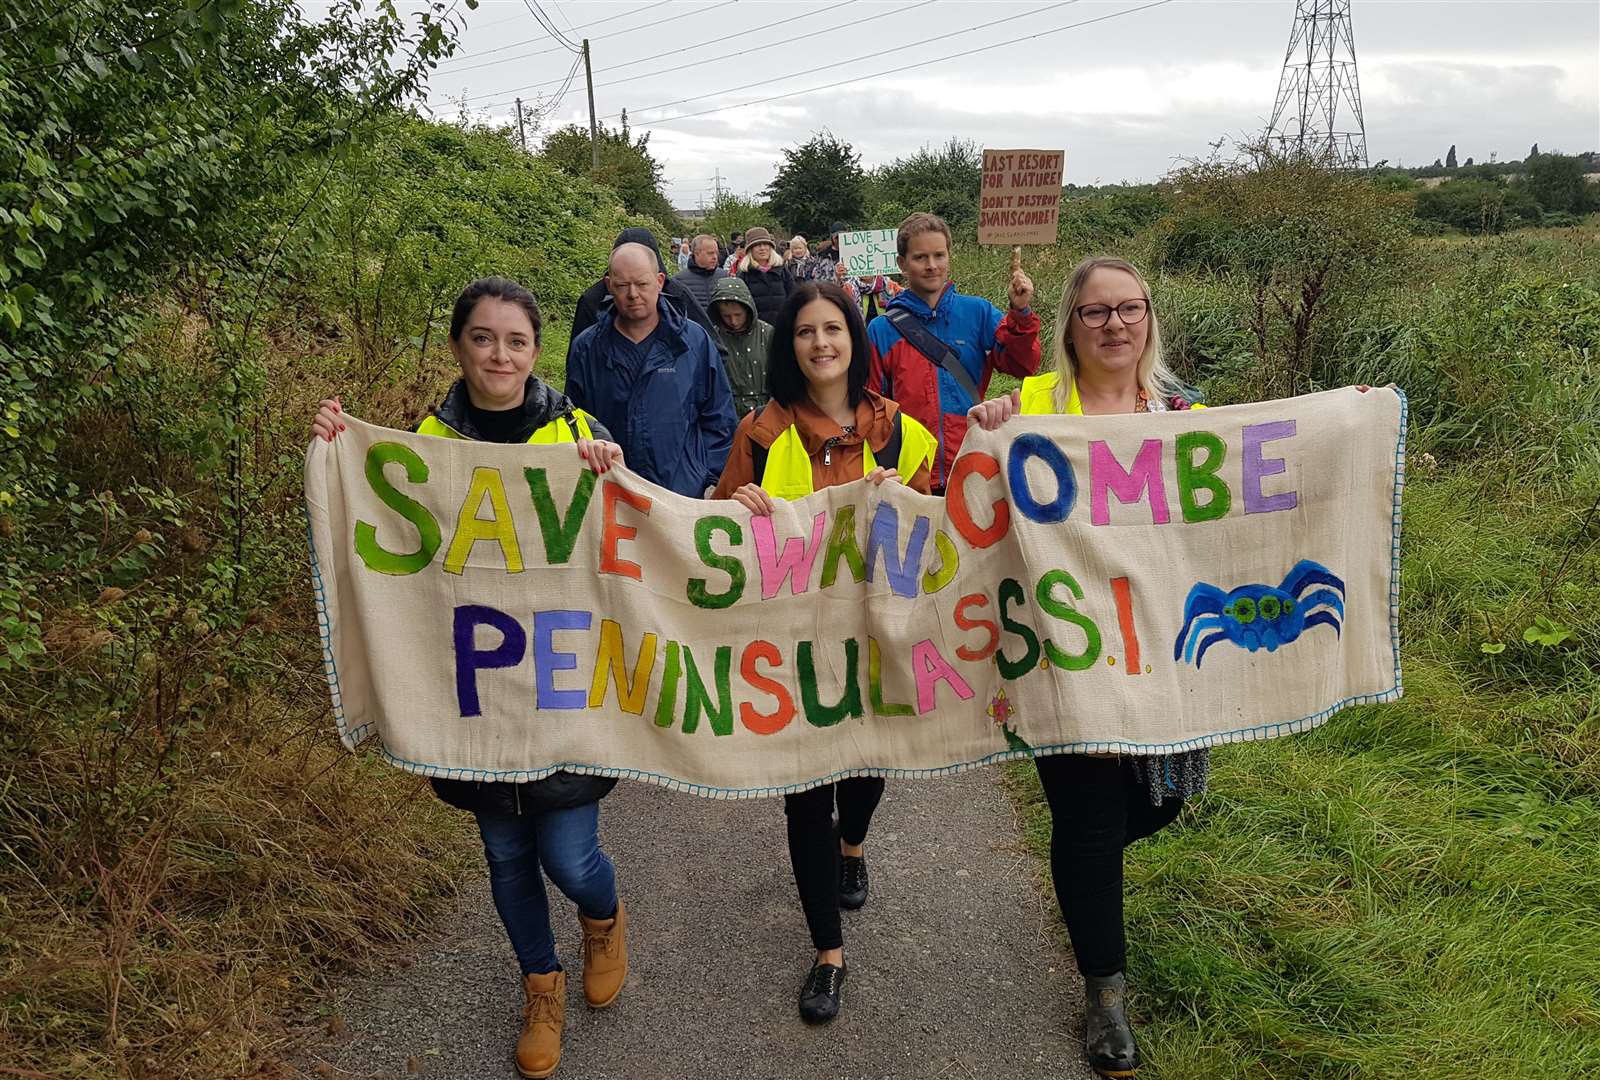 Campaigners have protested against plans to build a theme park on parts of the Swanscombe Marshes. Photo: Save Swanscombe Peninsula